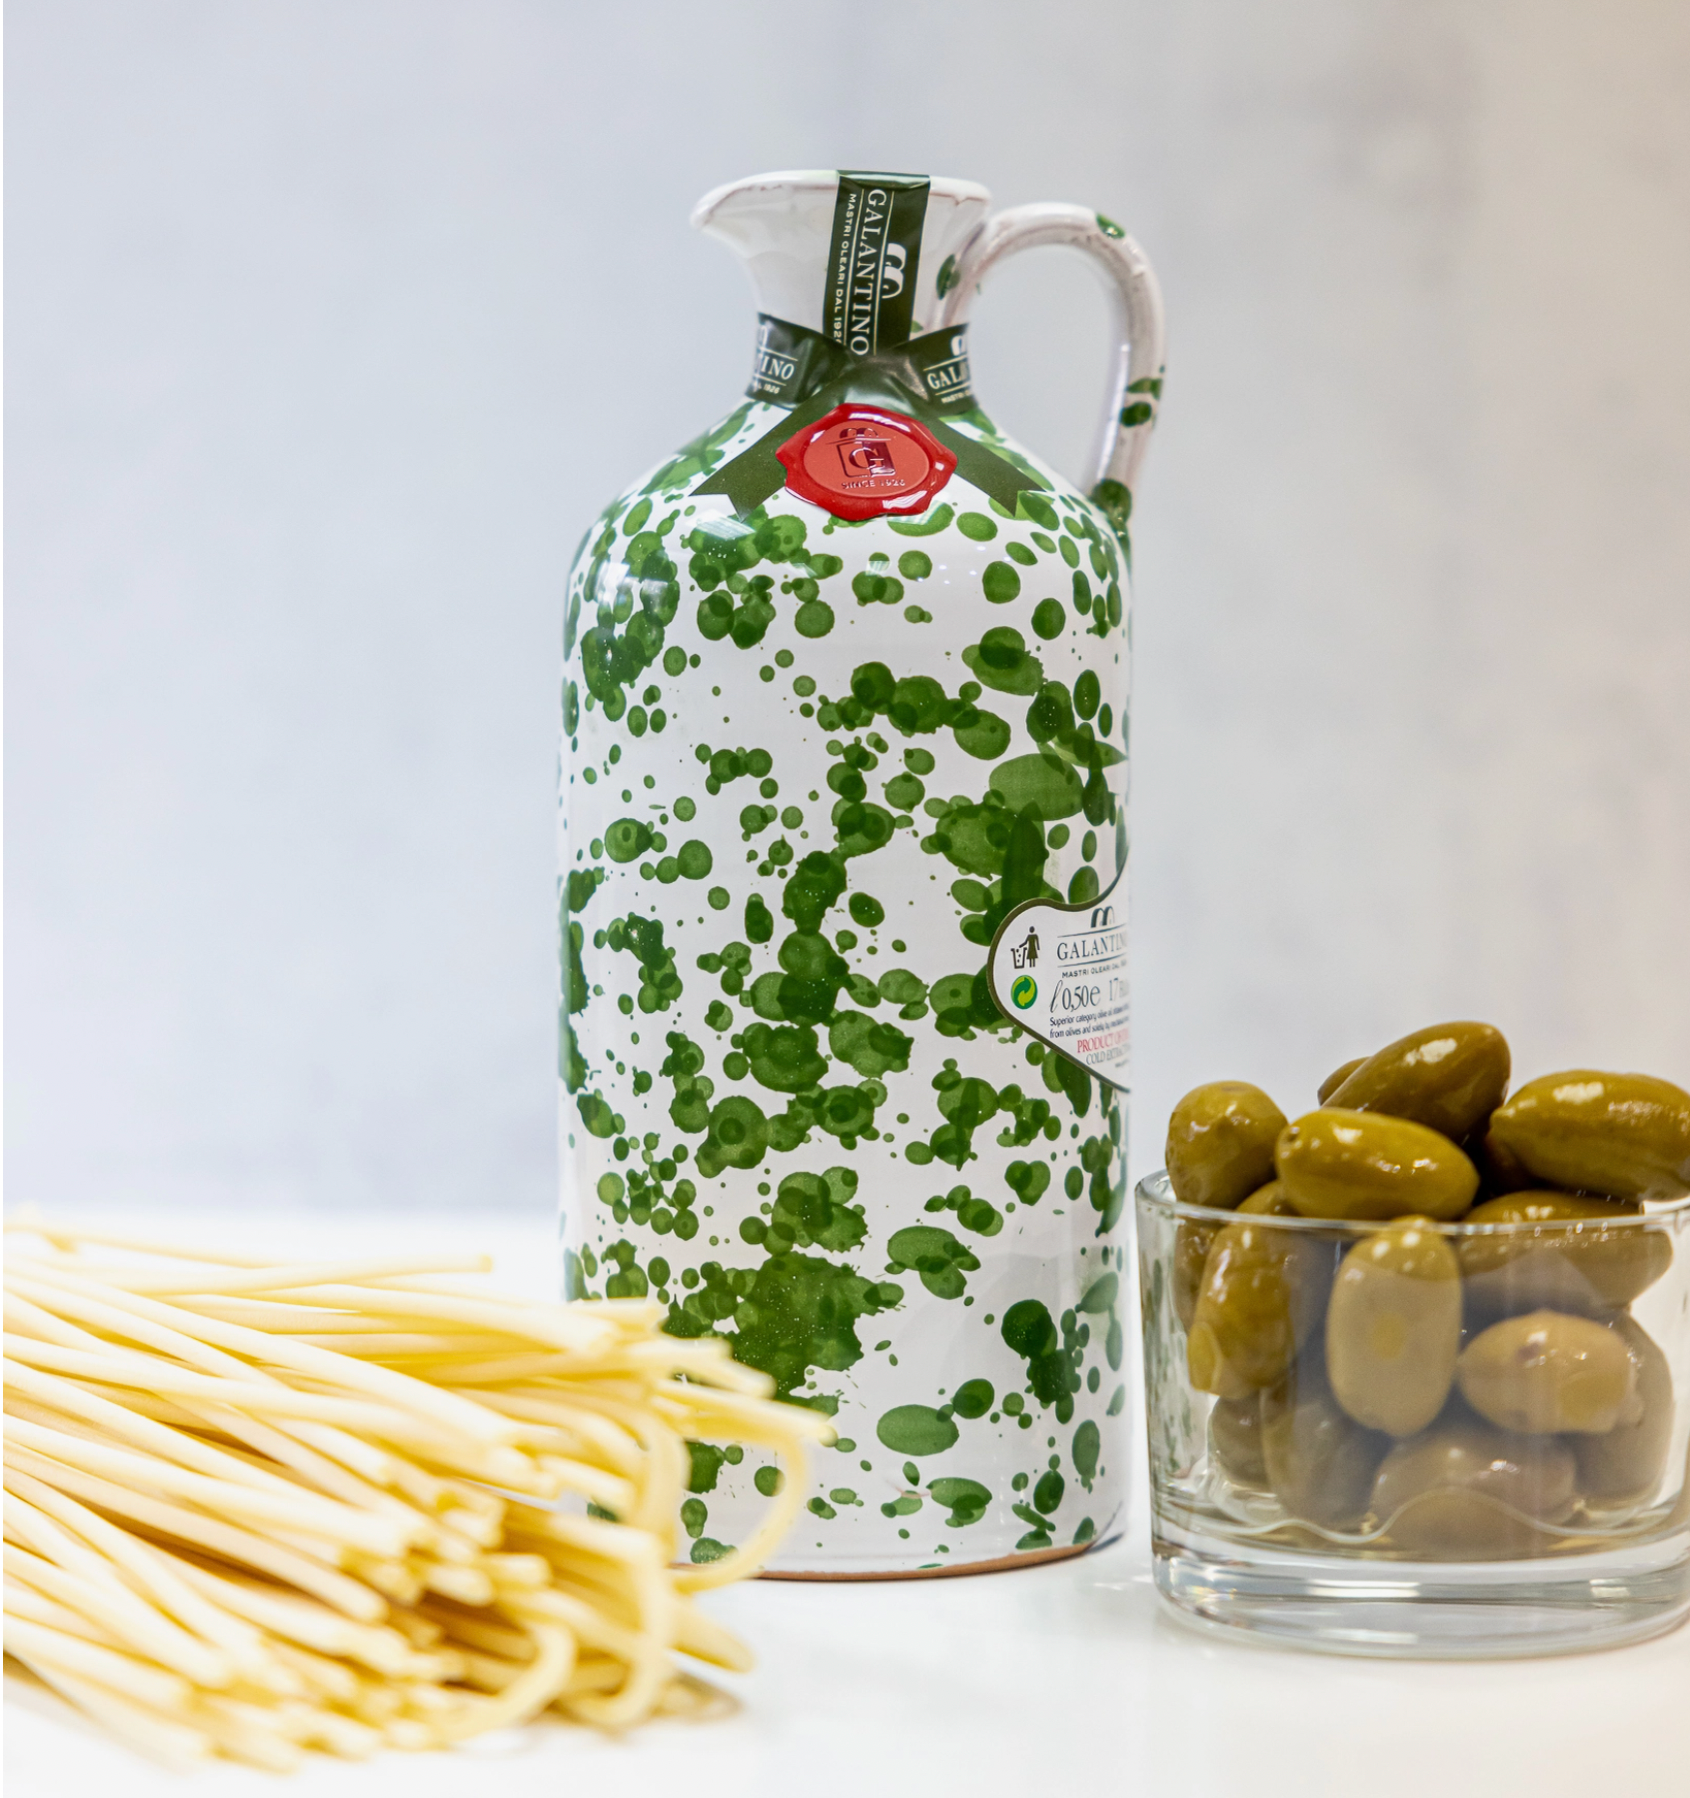 Extra Virgin Olive Oil in Hand Painted Ceramic by Galantino - Green